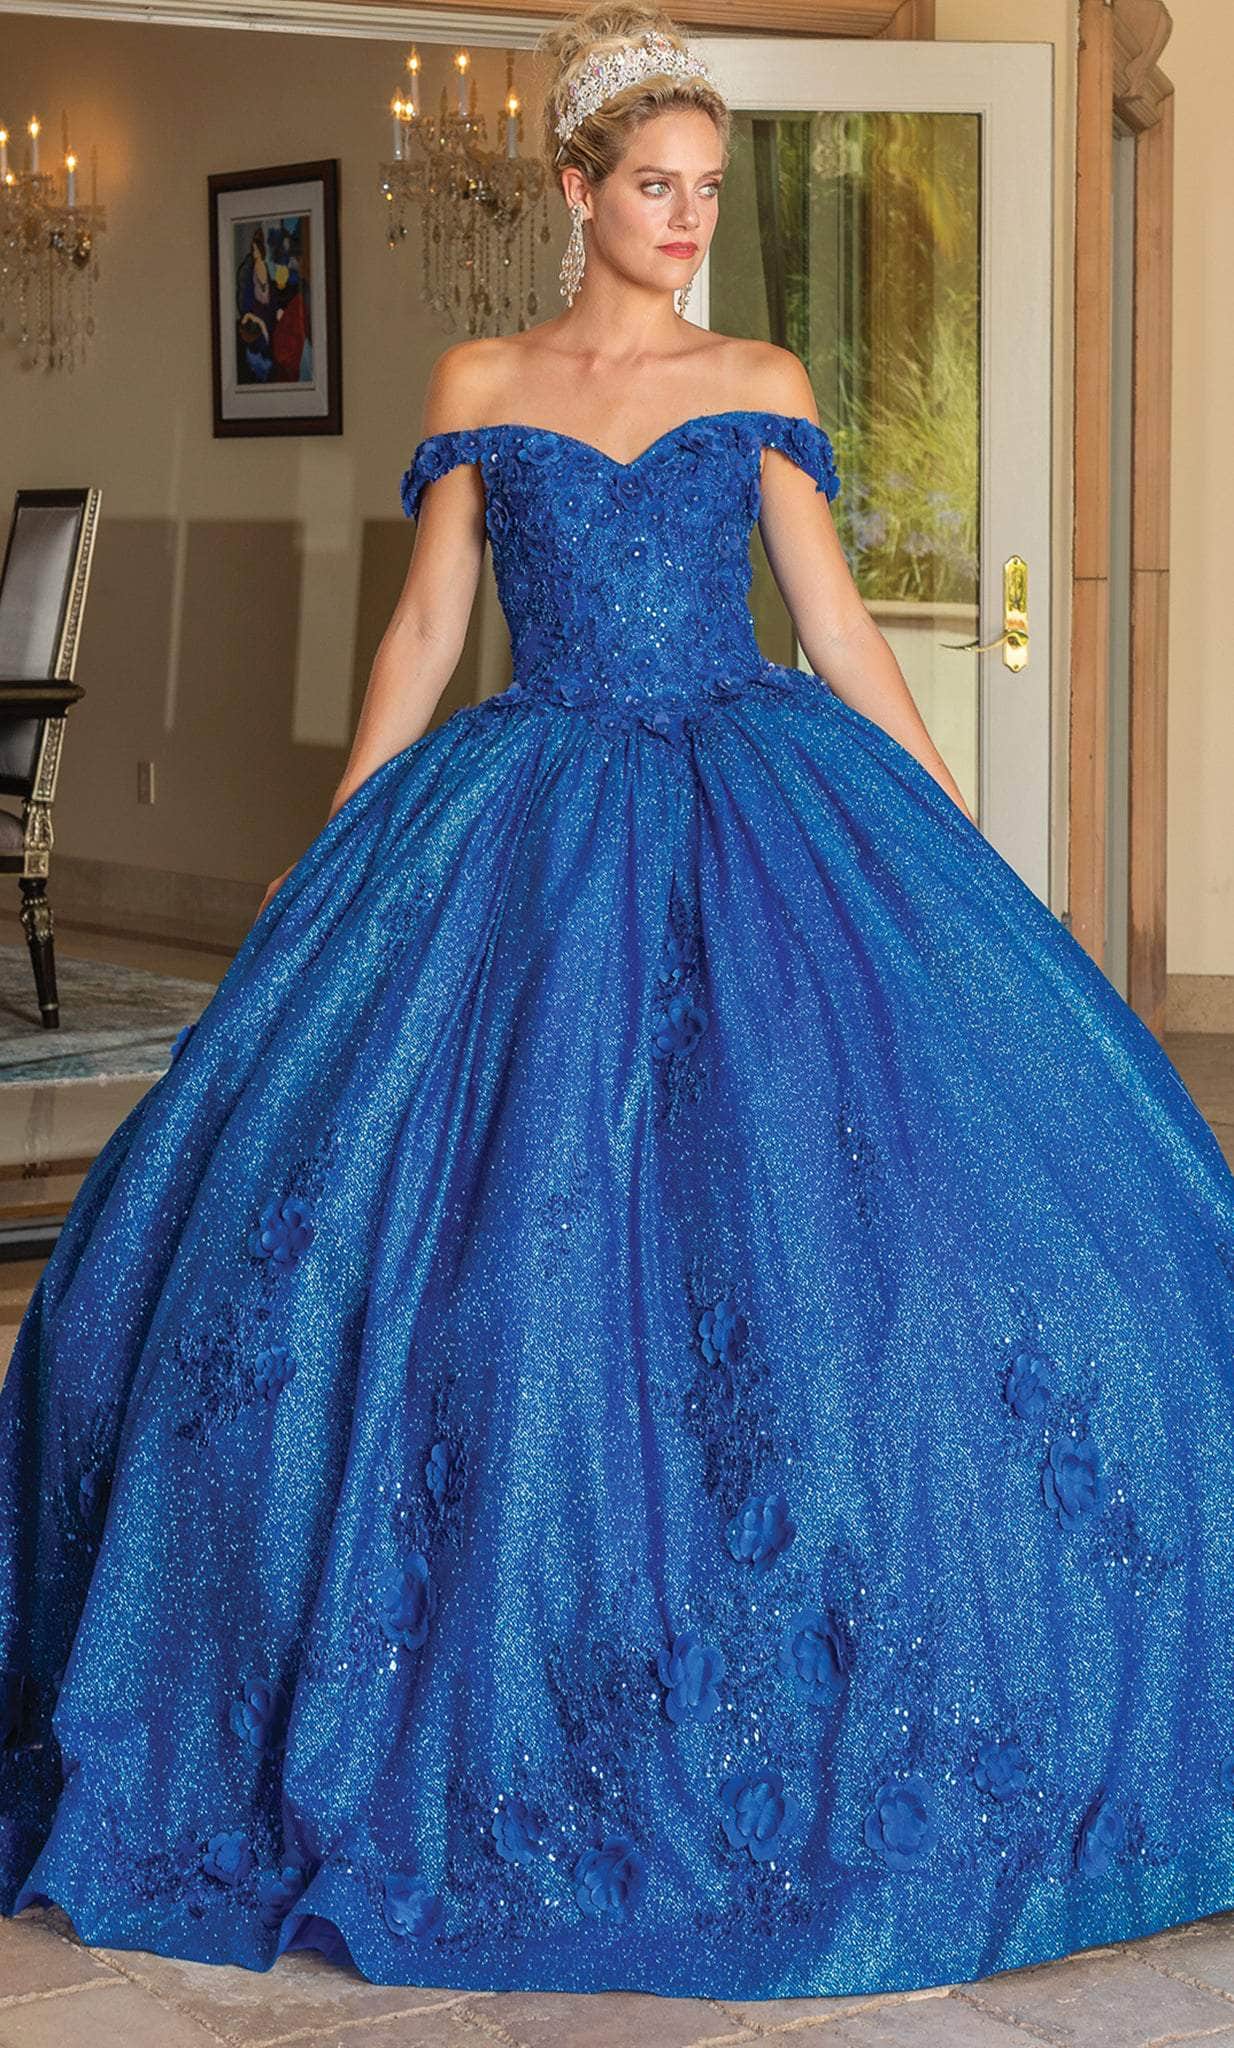 Dancing Queen 1718 - Off Shoulder Glitter Ballgown With Cape
